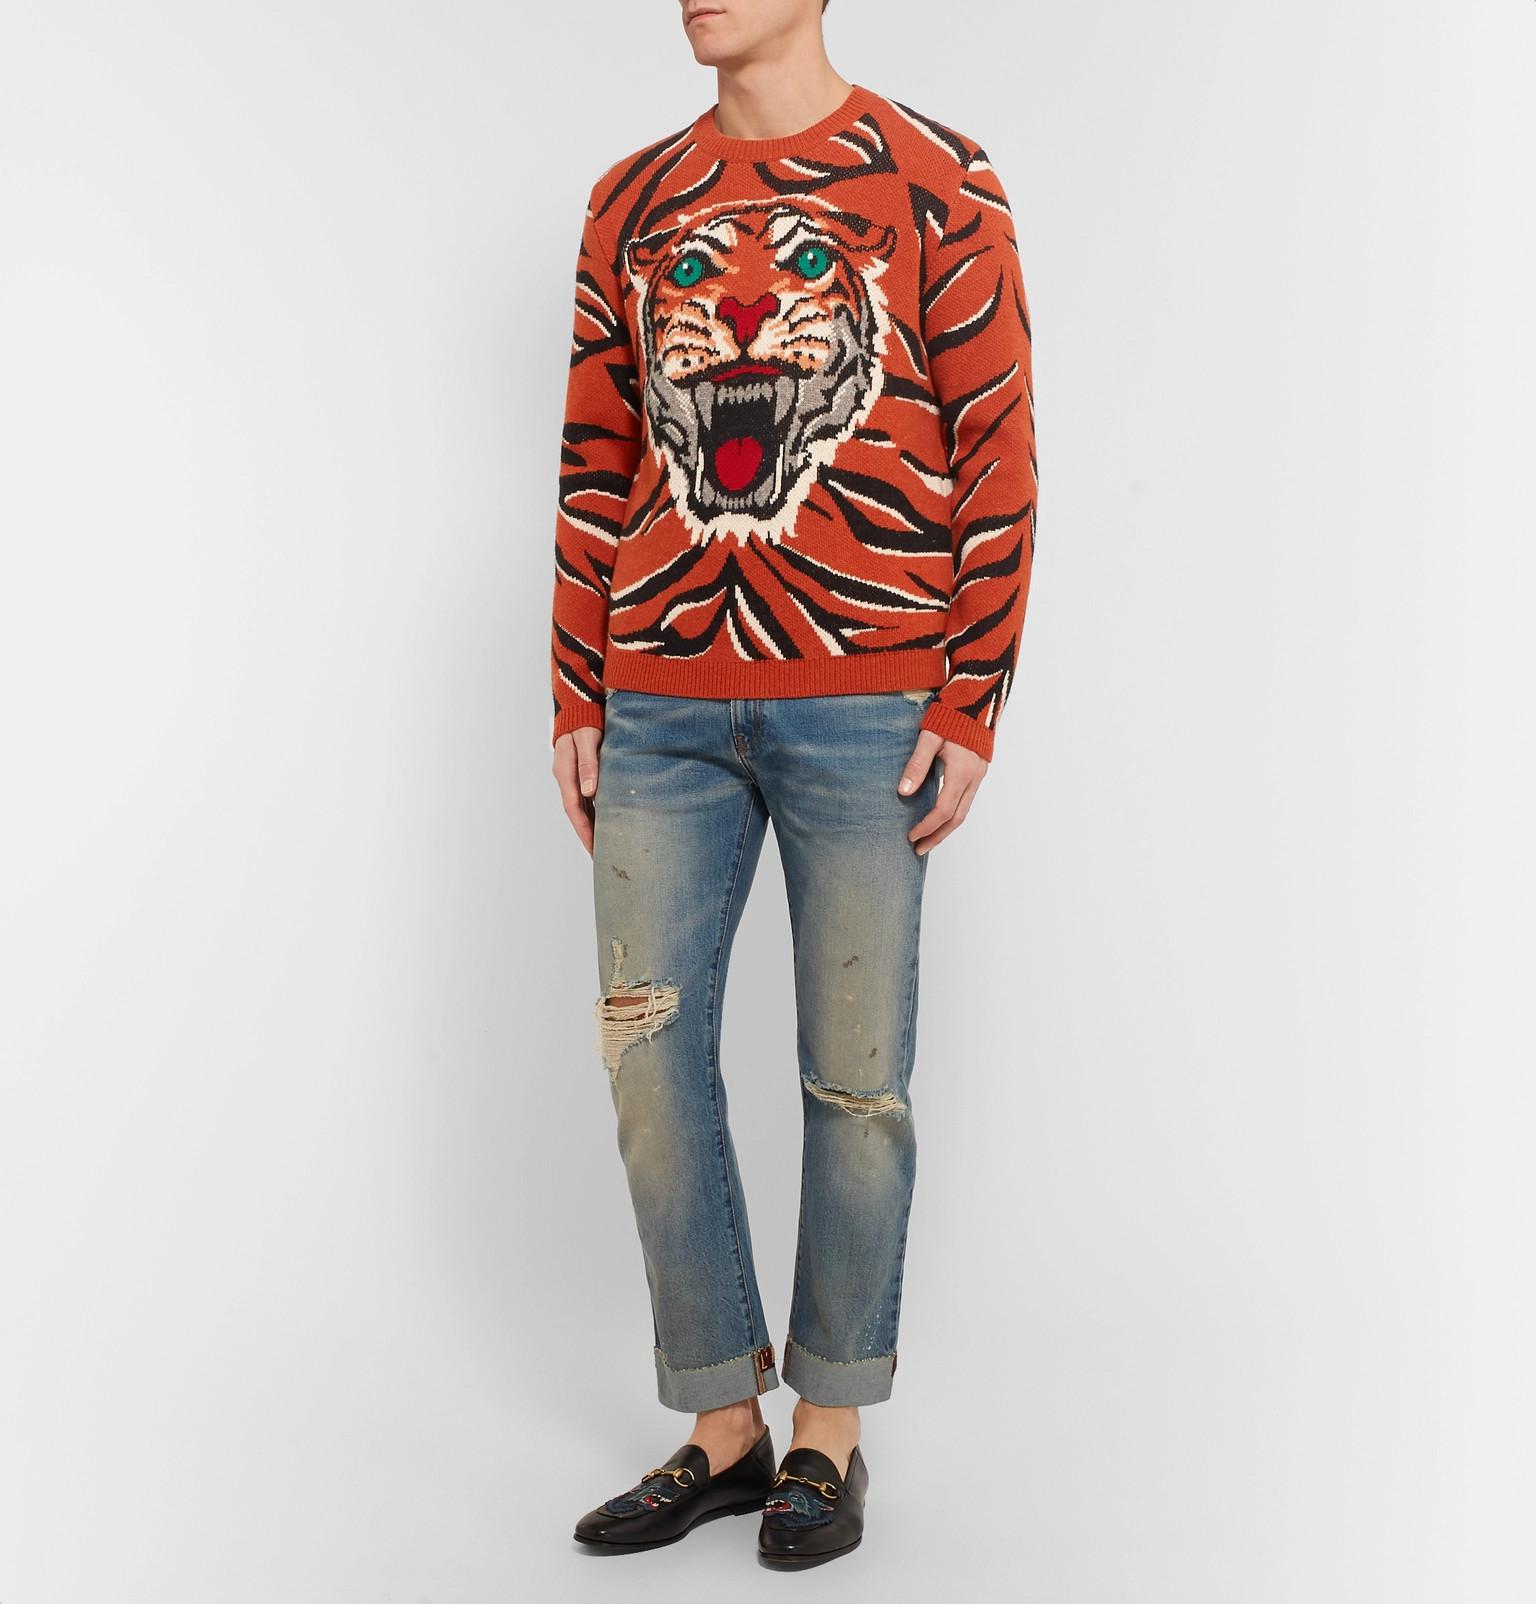 Gucci Embroidered Tiger-intarsia Wool Sweater in Orange for Men - Lyst